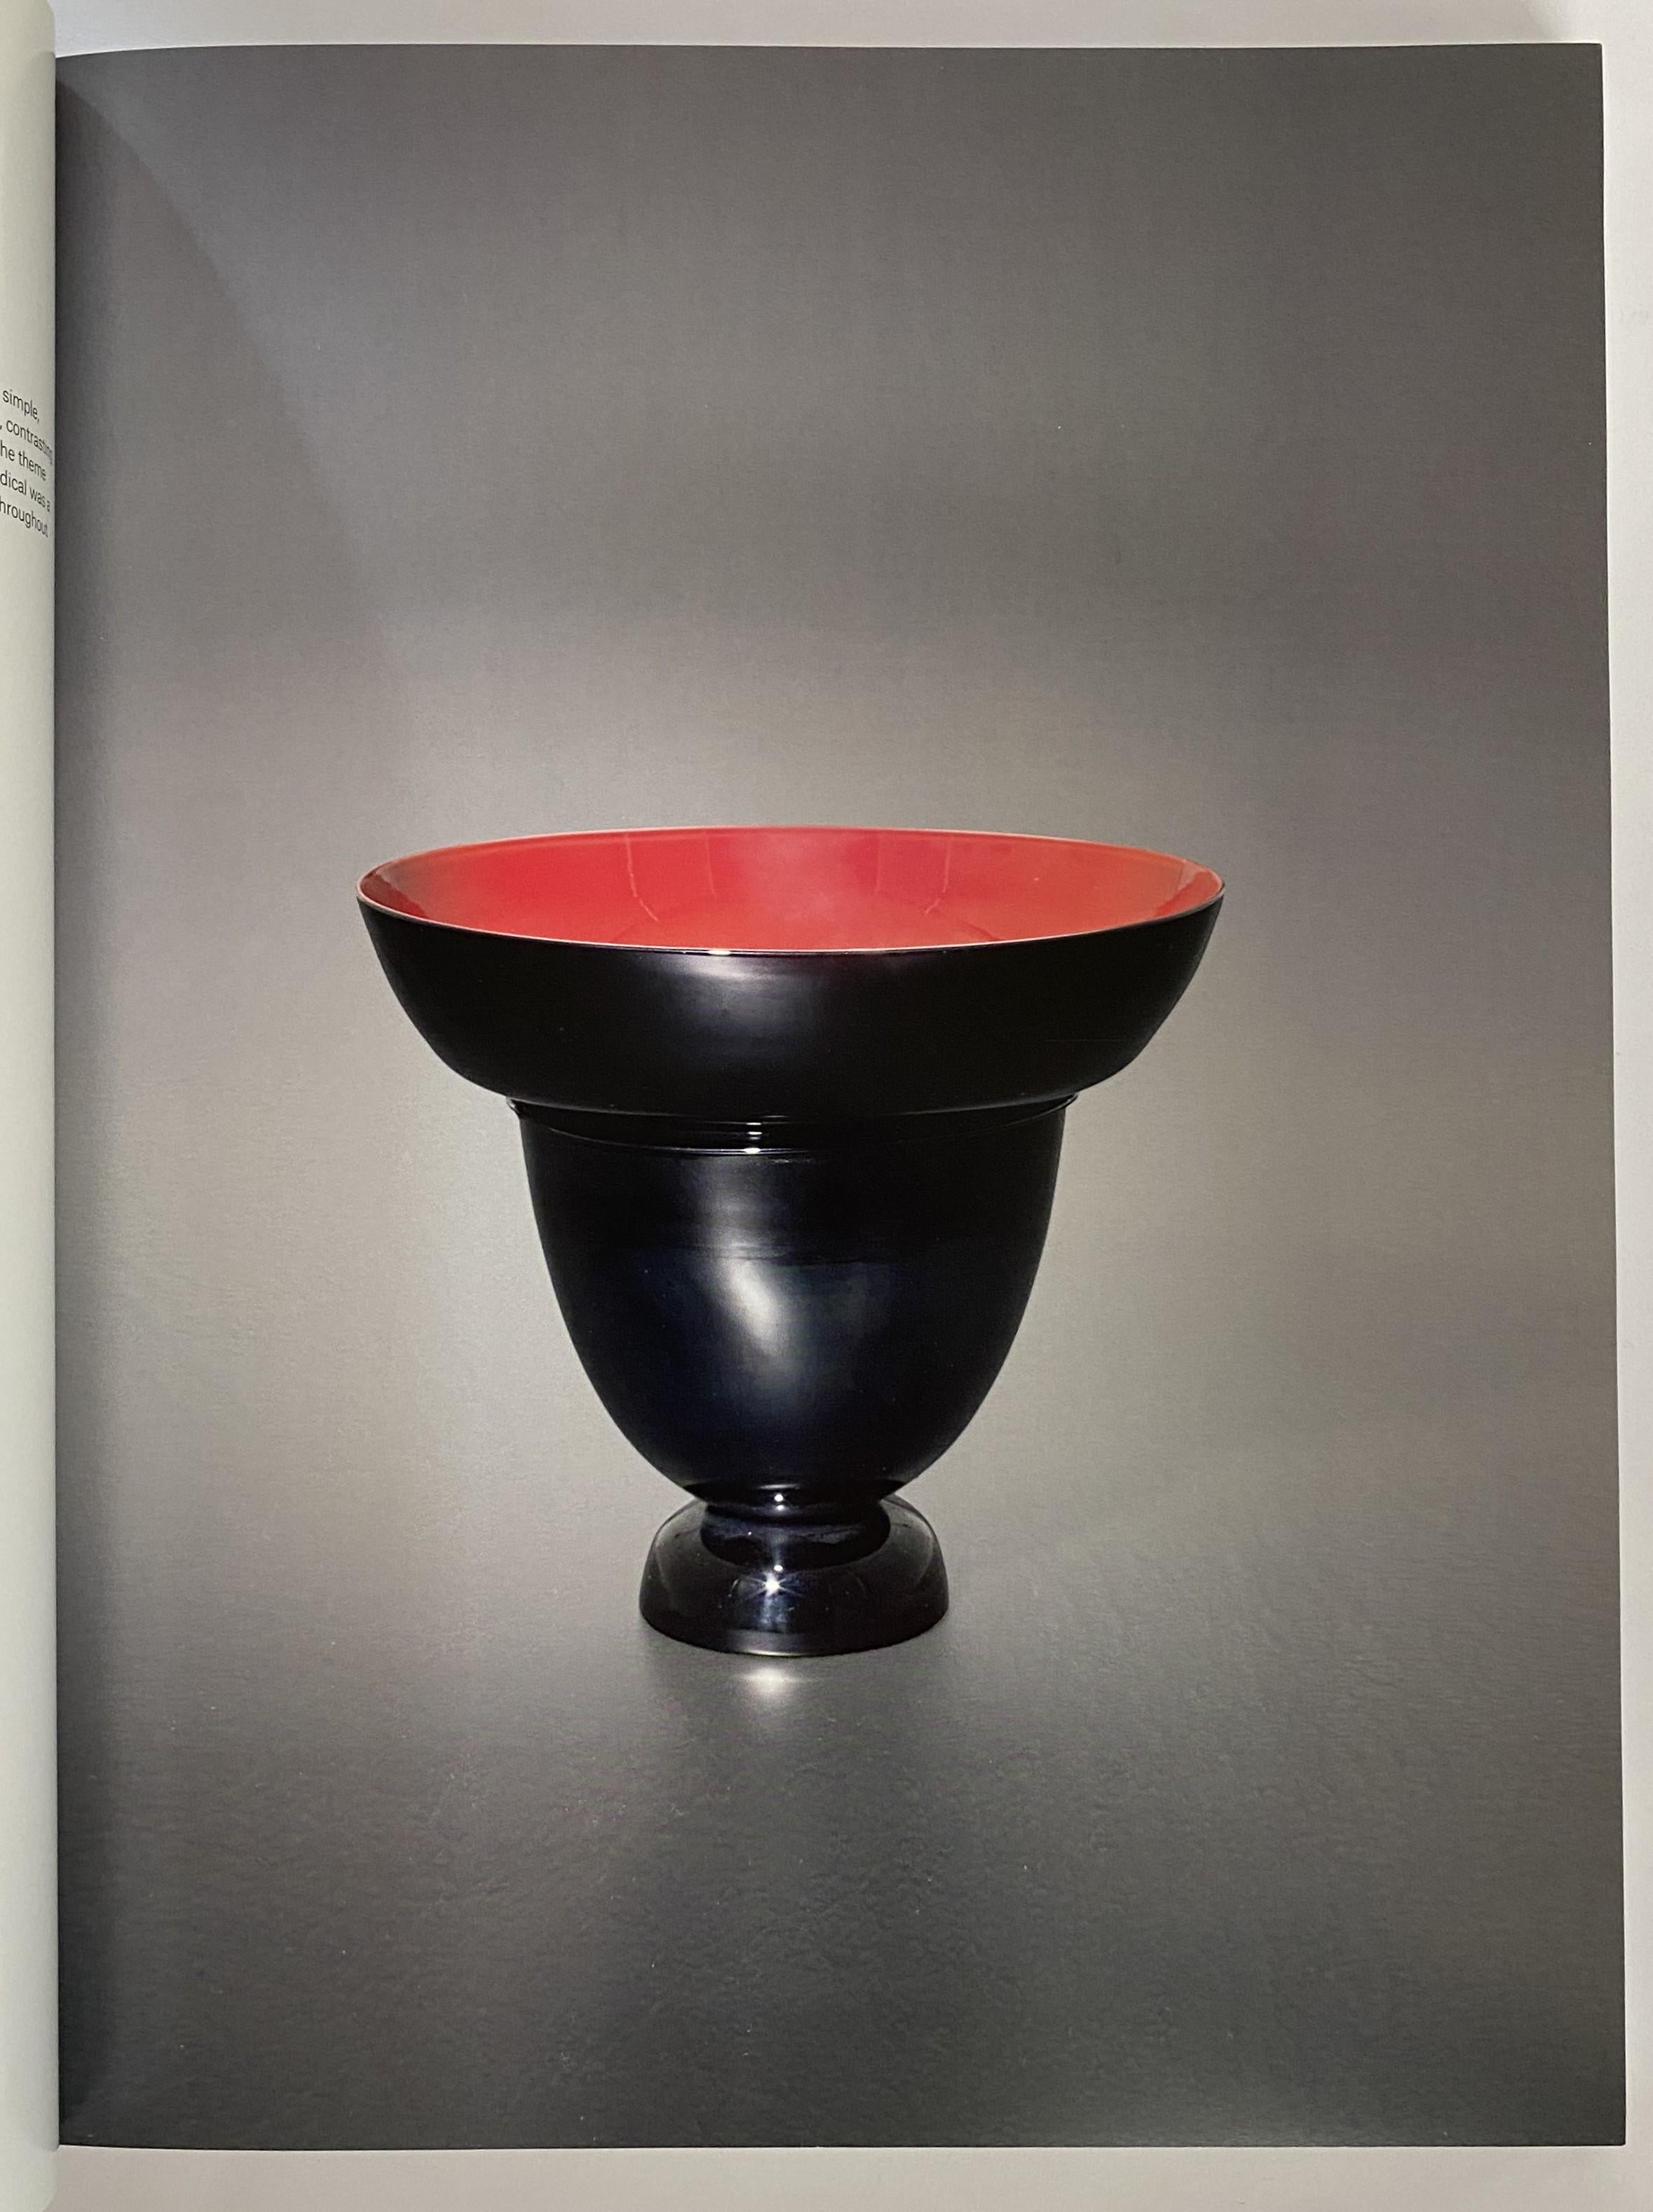 A Private European Collection New York 4th May 2017

Before Carlo Scarpa (1906-1978) began designing some of Italy’s most celebrated modernist buildings, he spent more than 20 years experimenting with Venetian glass. His glassware is now highly